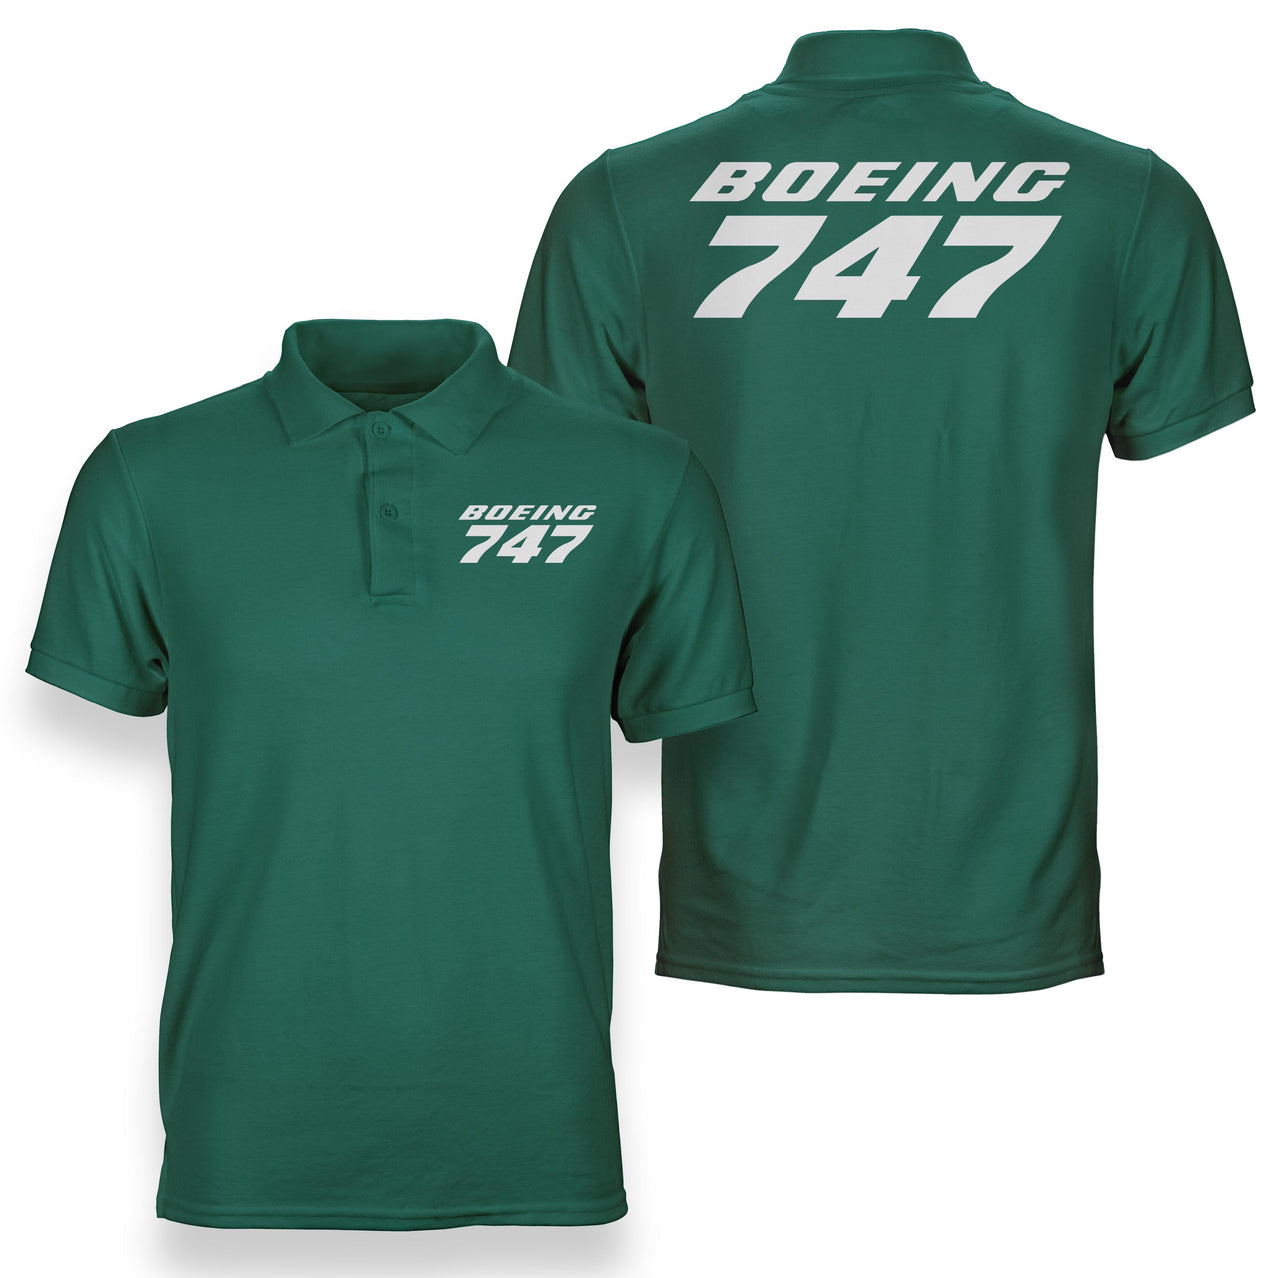 Boeing 747 & Text Designed Double Side Polo T-Shirts